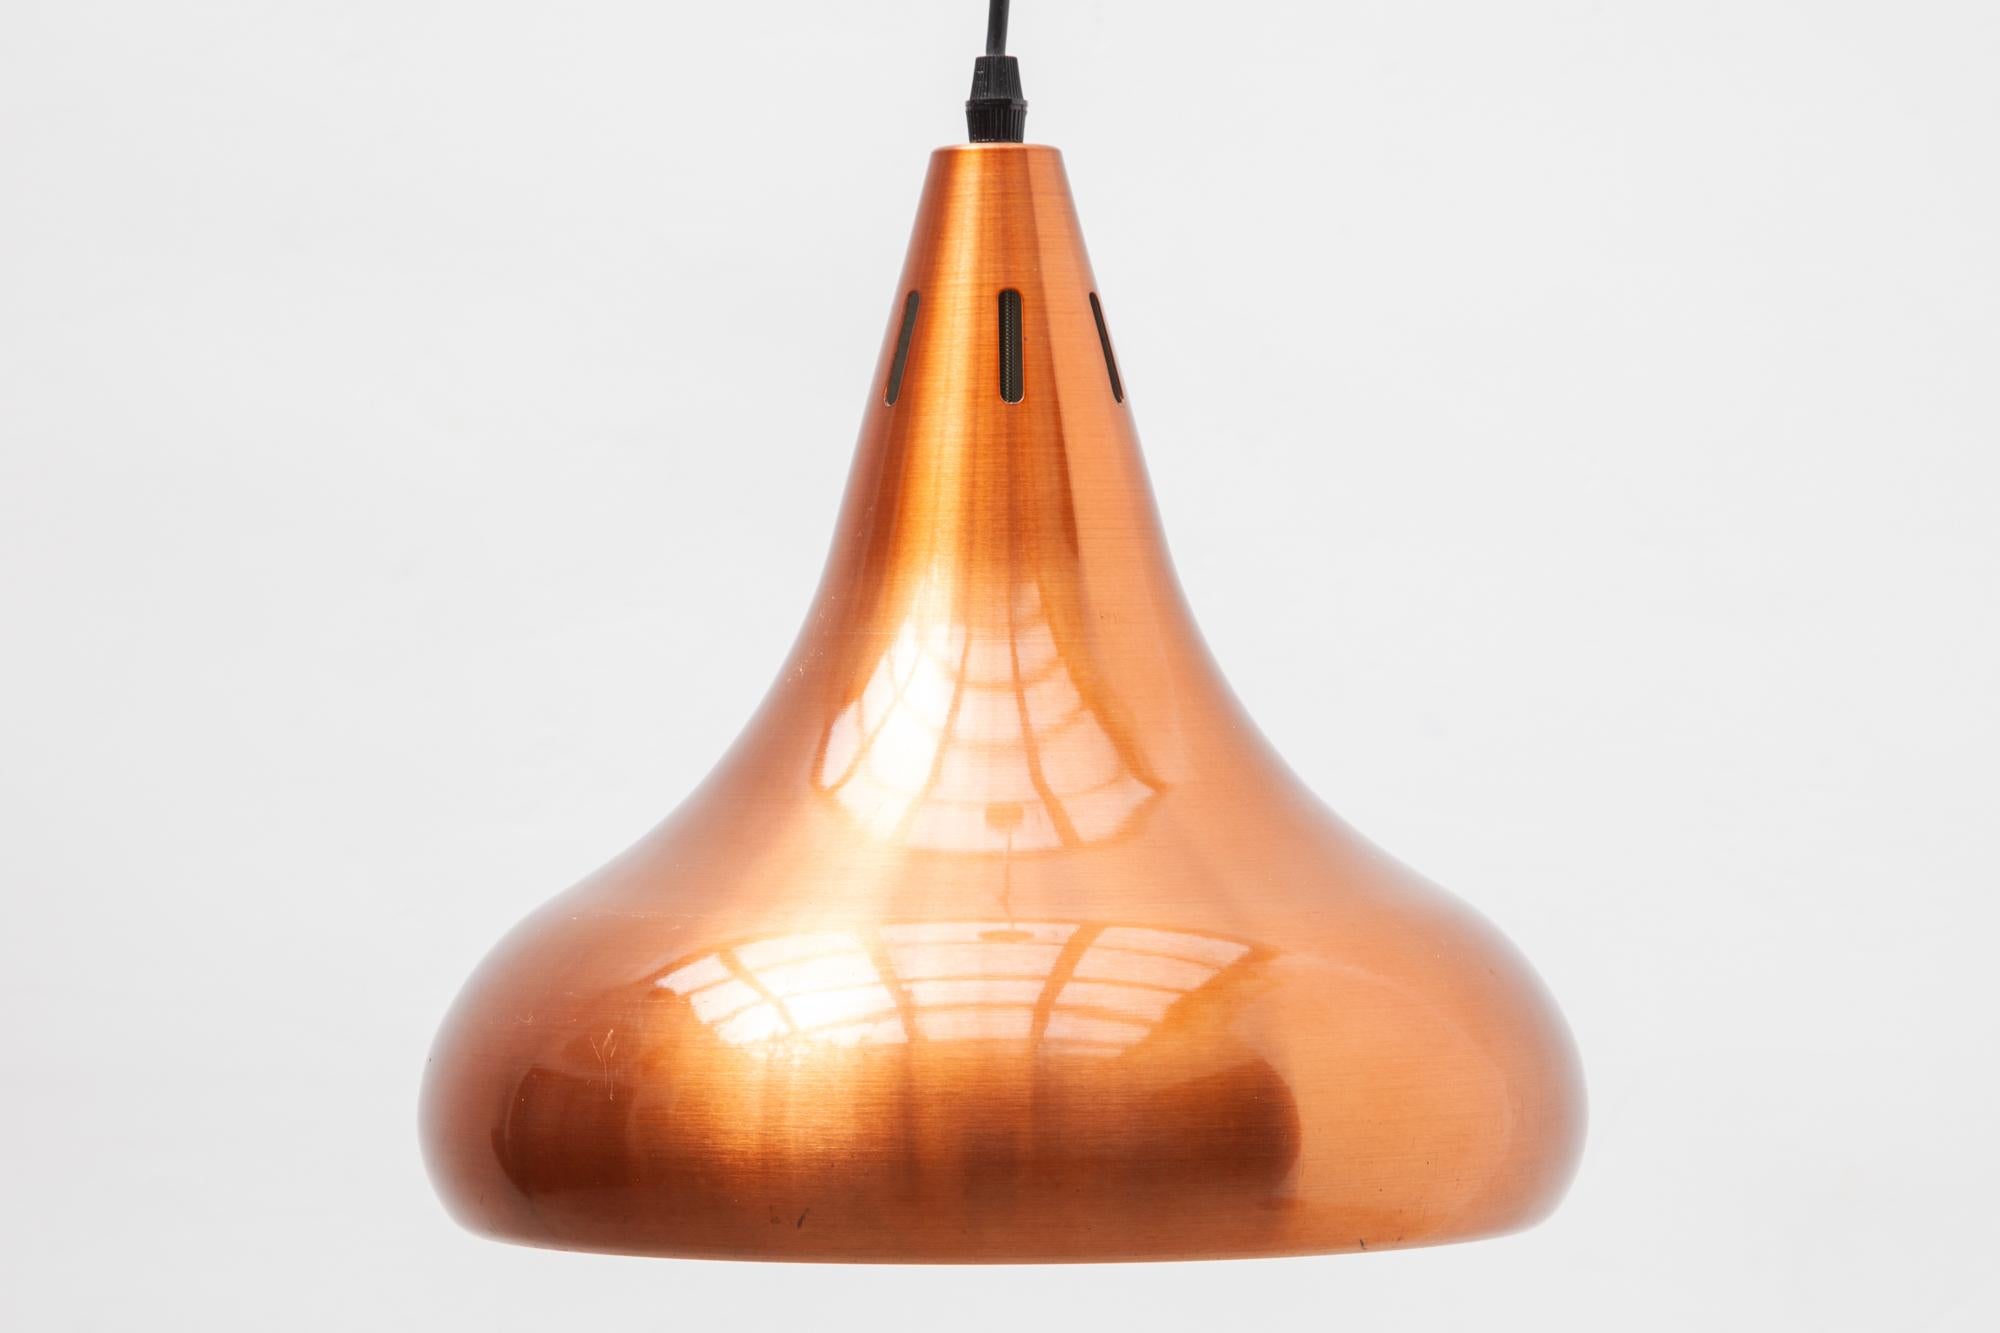 Vintage pendant lights with a glossy copper shade. The black cord which can be adjusted in height. The
interior of the shade is white to reflect light. 1 bulb.
Shade: 30W x 30H cm/cord: 80 cm high.